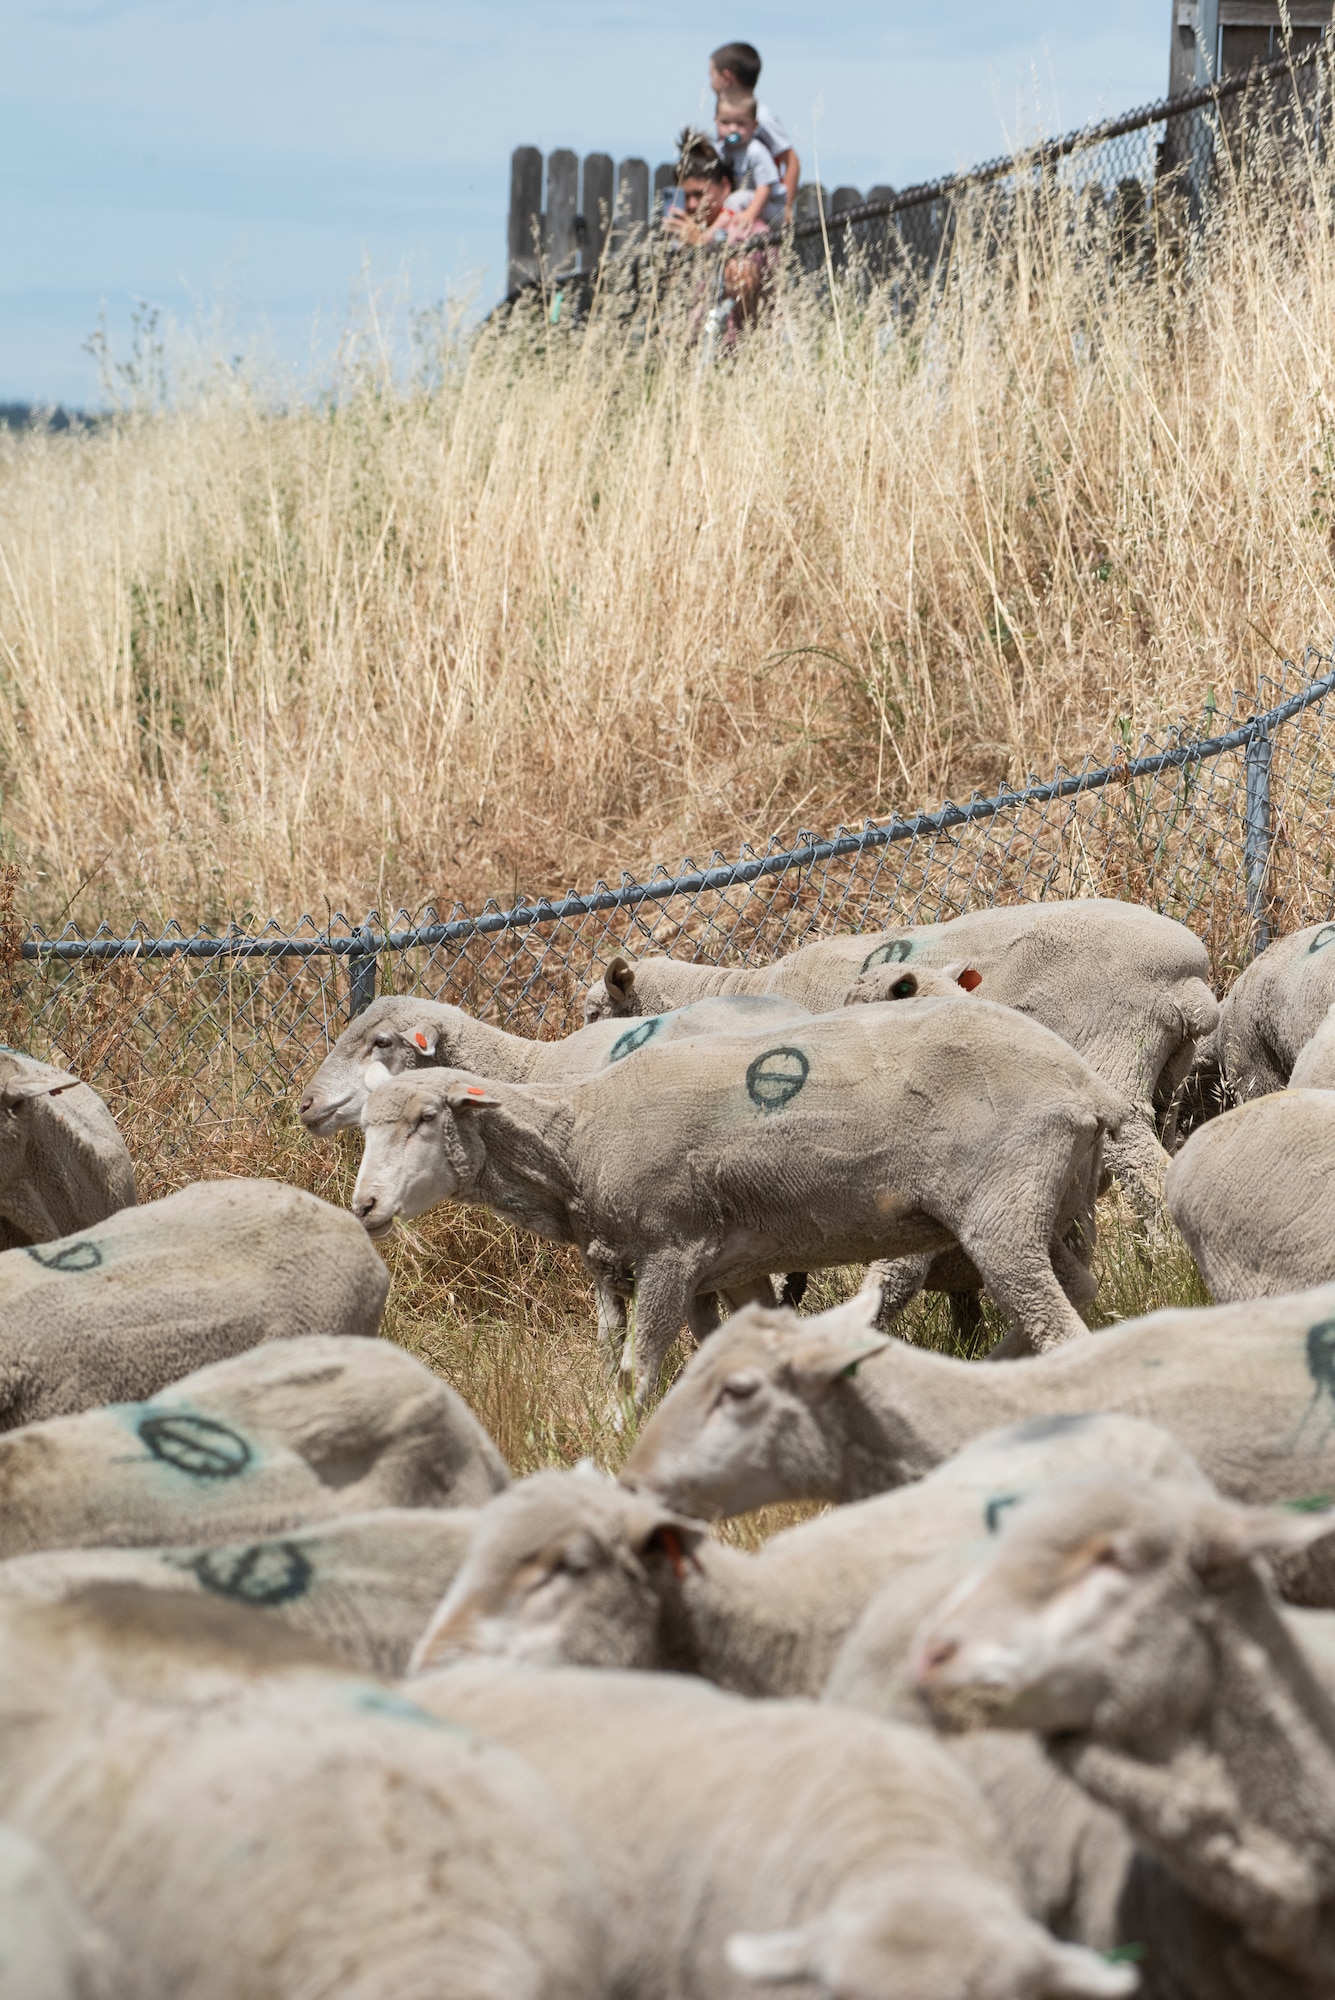 A military family watches as sheep graze at Travis Air Force Base, California, May 6, 2022. A flock of approximately 1,000 sheep were released to clear overgrown weeds eliminating the need for herbicides and machinery. This grazing method saves time and money, reduces fire hazards and protects the environment. (U.S. Air Force photo by Heide Couch)